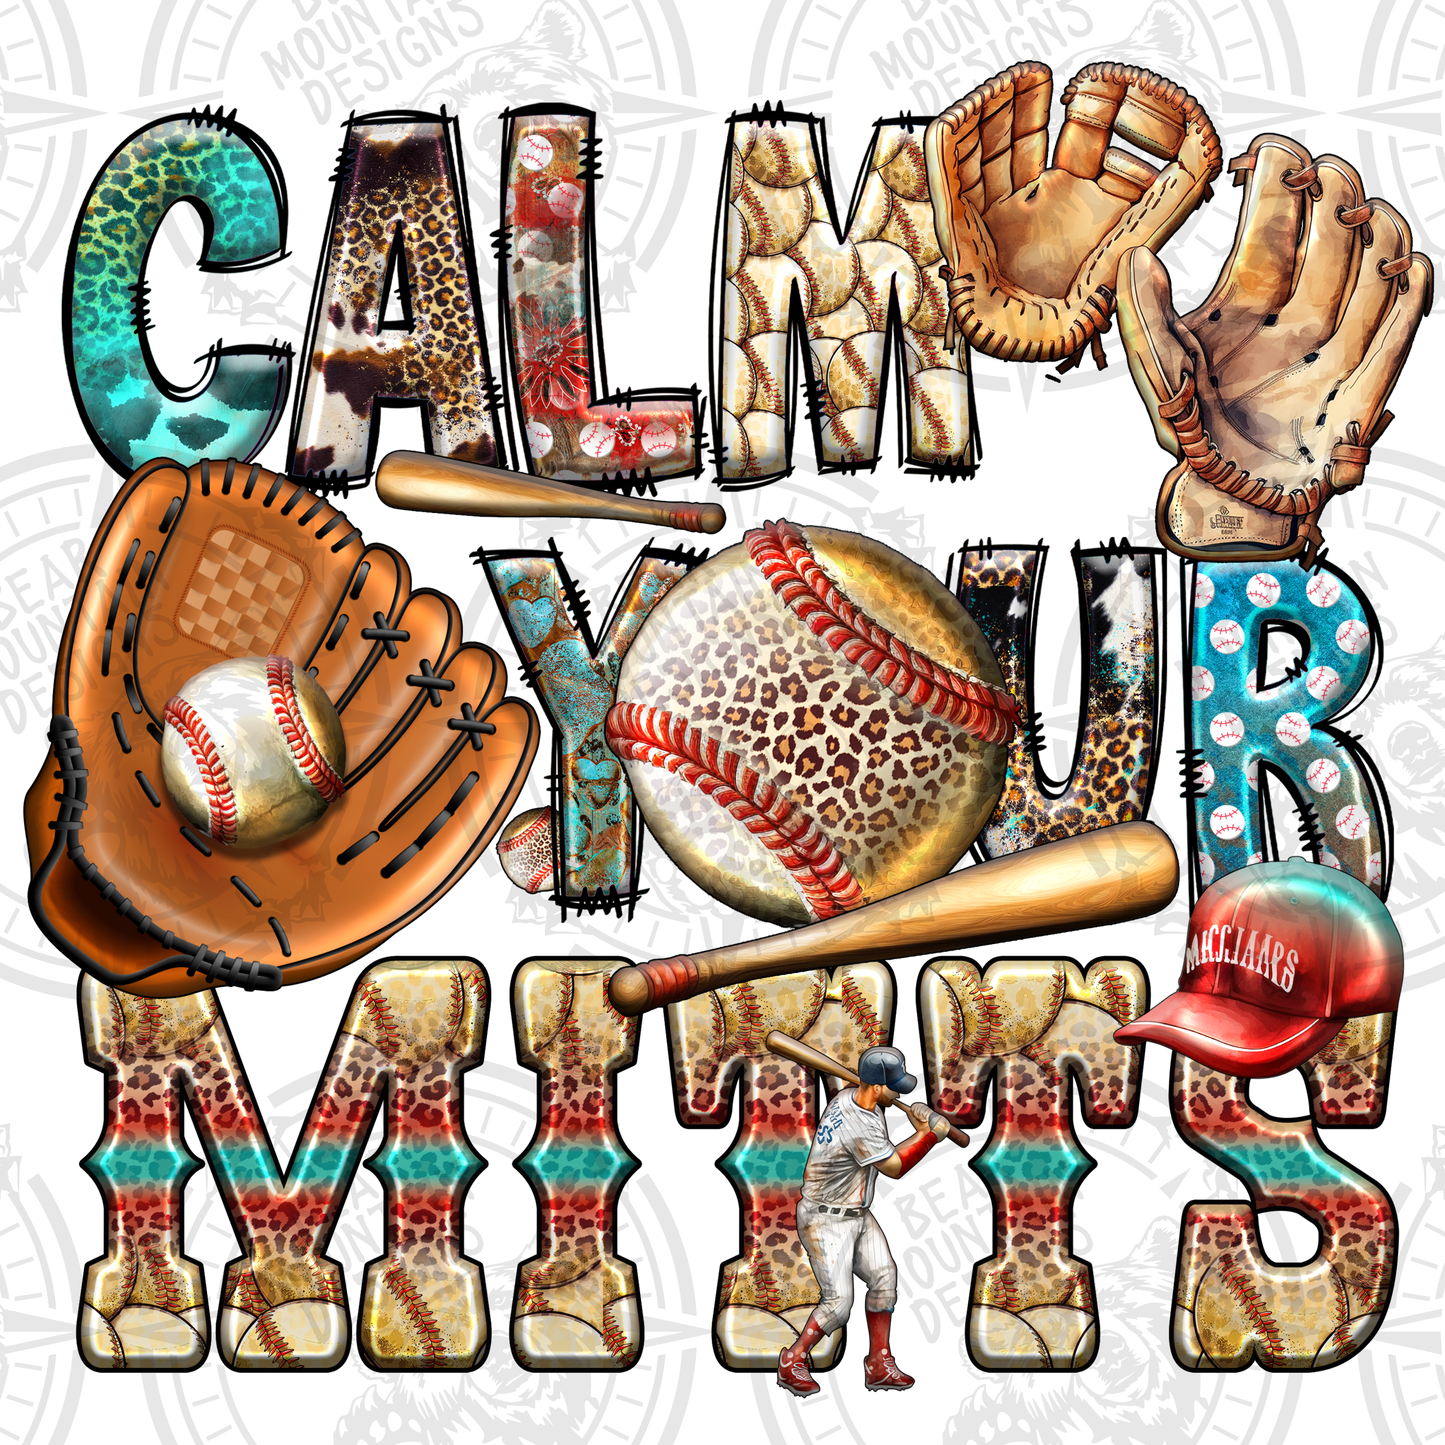 Calm Your Mitts 1 - Baseball